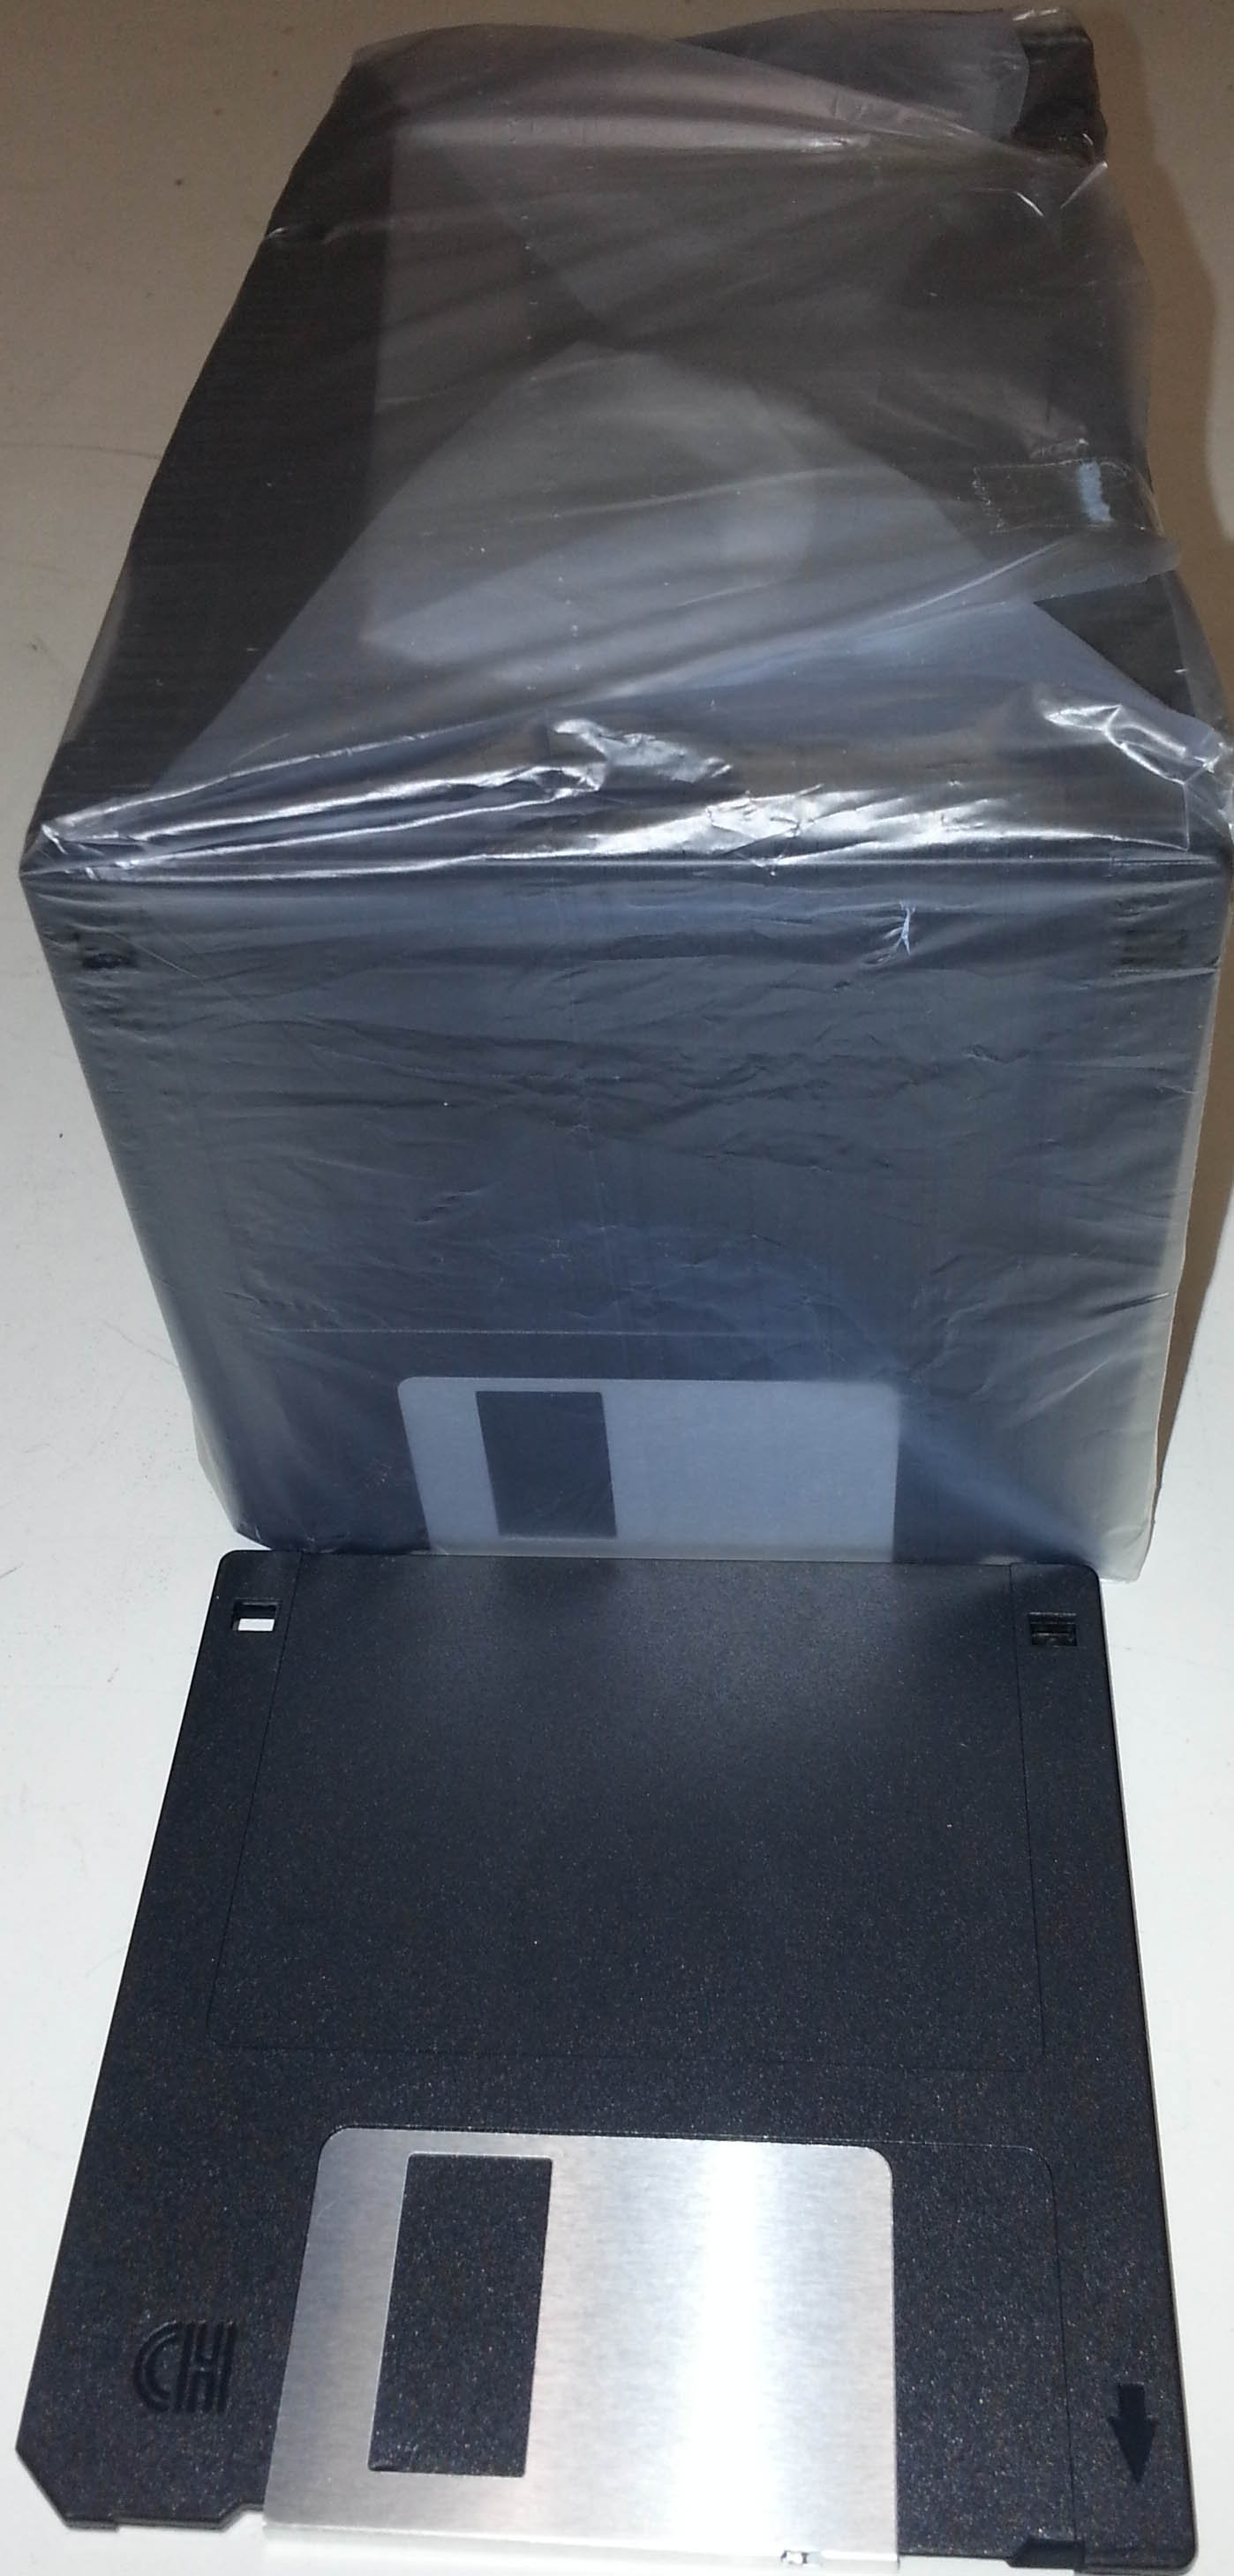 50 Floppy Disks Manufactured in 2011. Formatted 1.44 MB DS/HD MF-2HD 3.5 inch Diskettes 